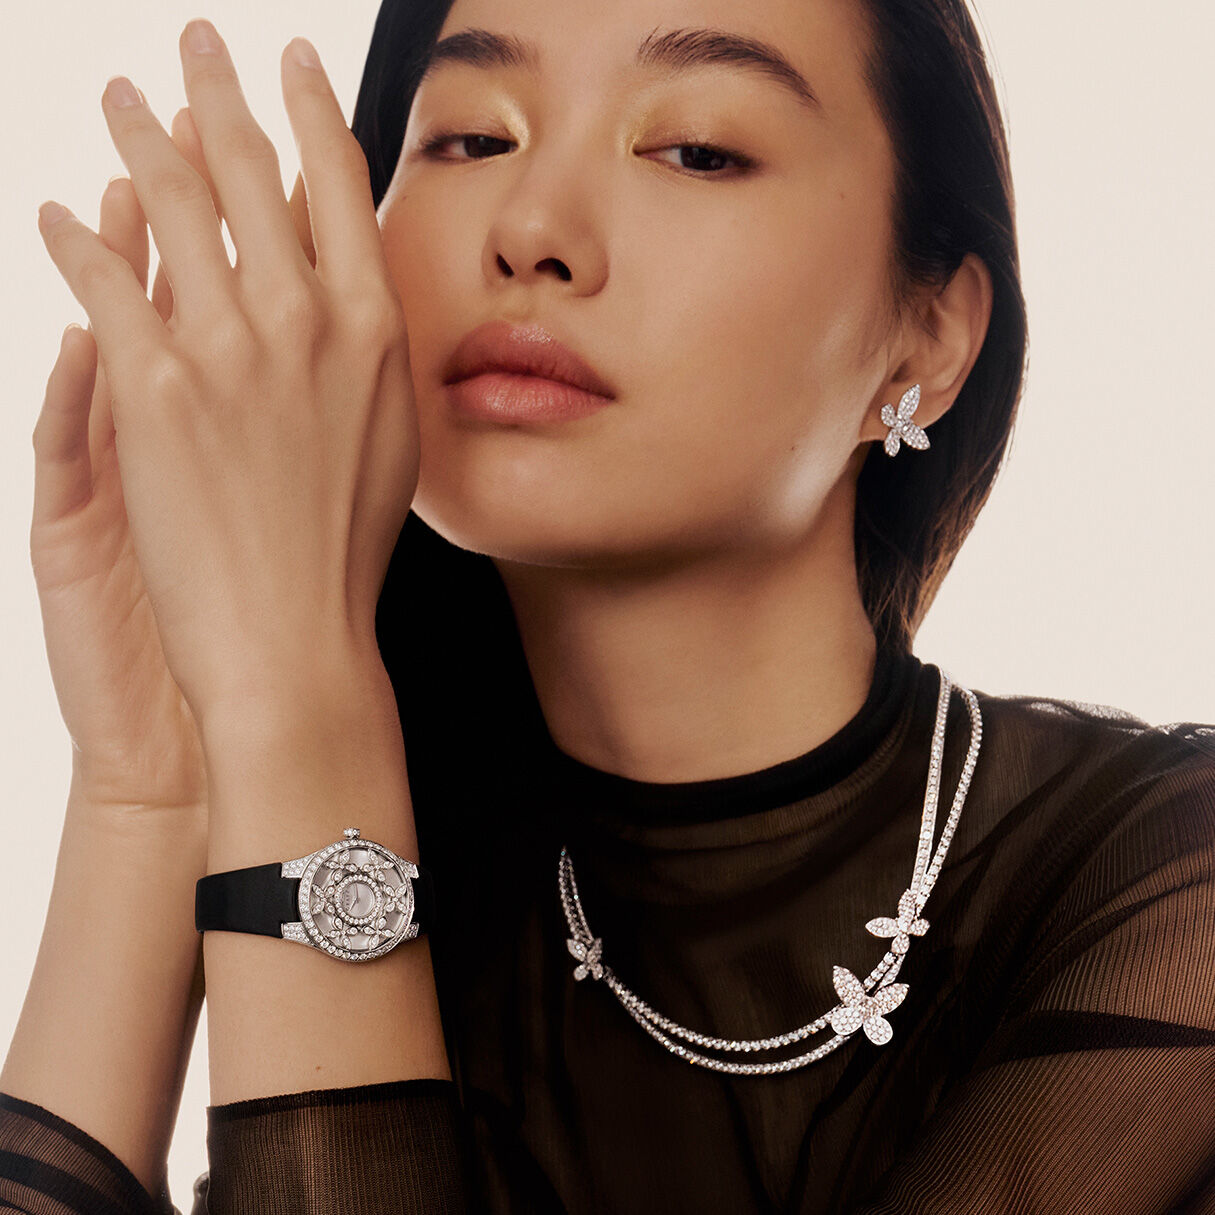 Model wears Graff Diamond Butterfly Collections Necklace, Watch and Earrings